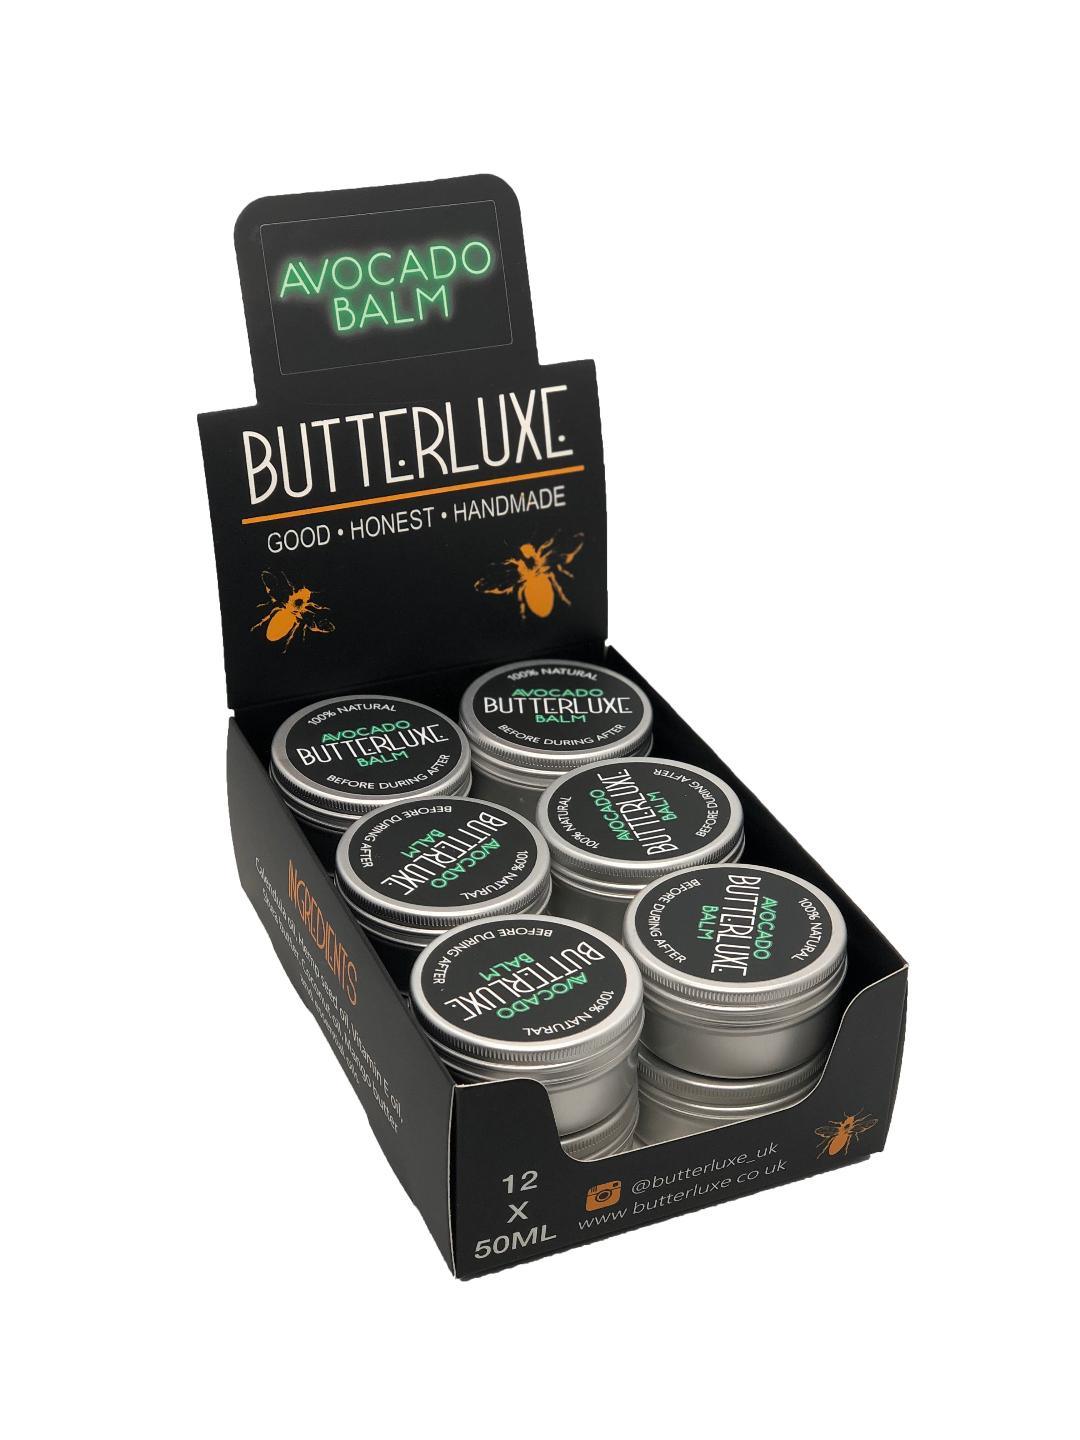 Butterluxe Whipped Butter 50ml Flavours